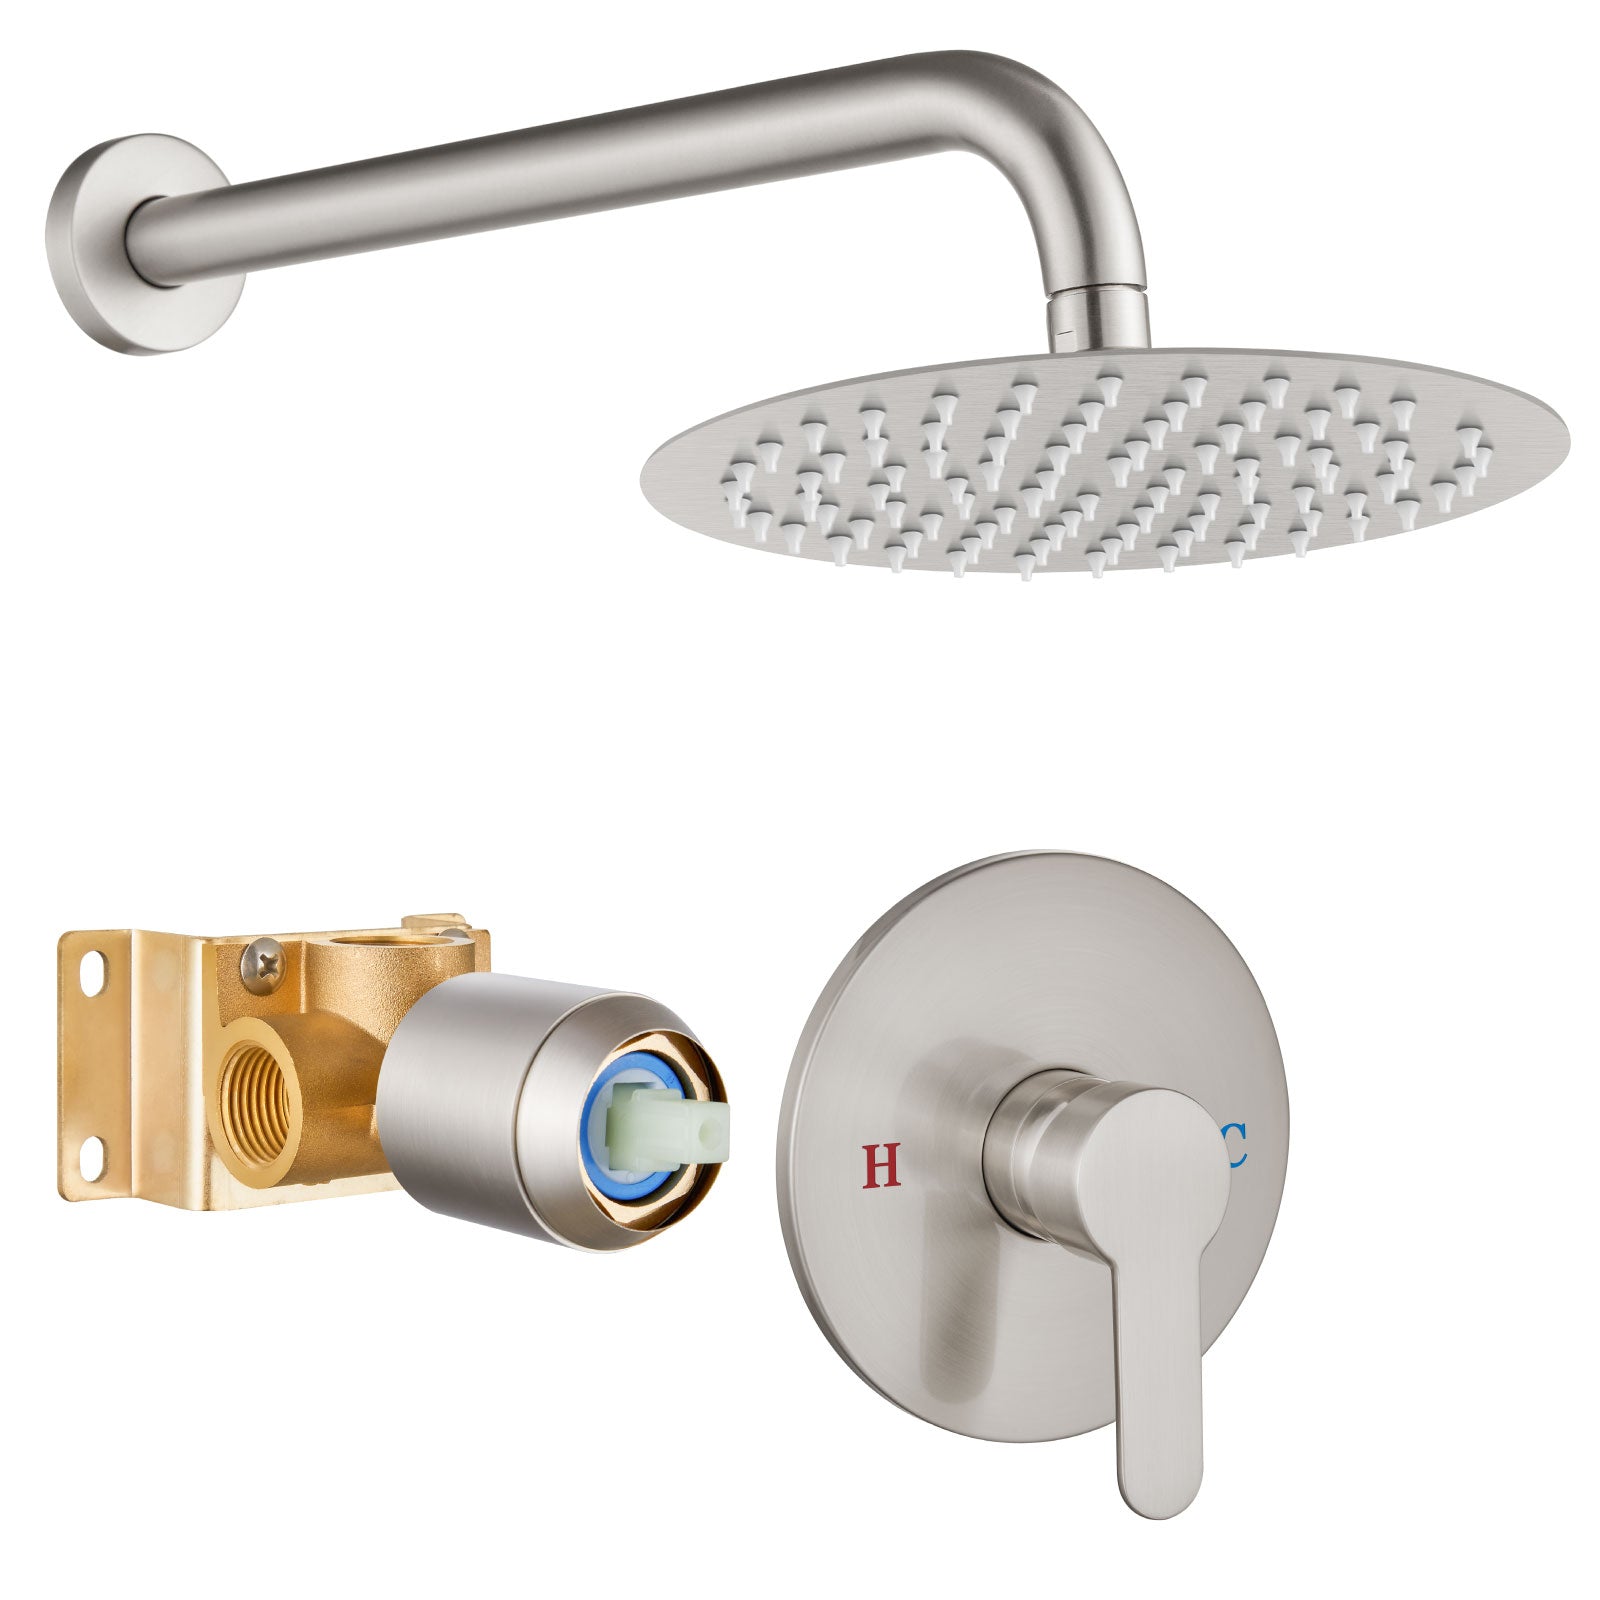 Airuida Shower Faucet Set,Shower Trim Kit with Female Threads Rough-in Valve,Wall Mount SUS304 8 Inch Round Shower Head and Handle Set,Rainfall Shower System without Tub Spout Brushed Nickel